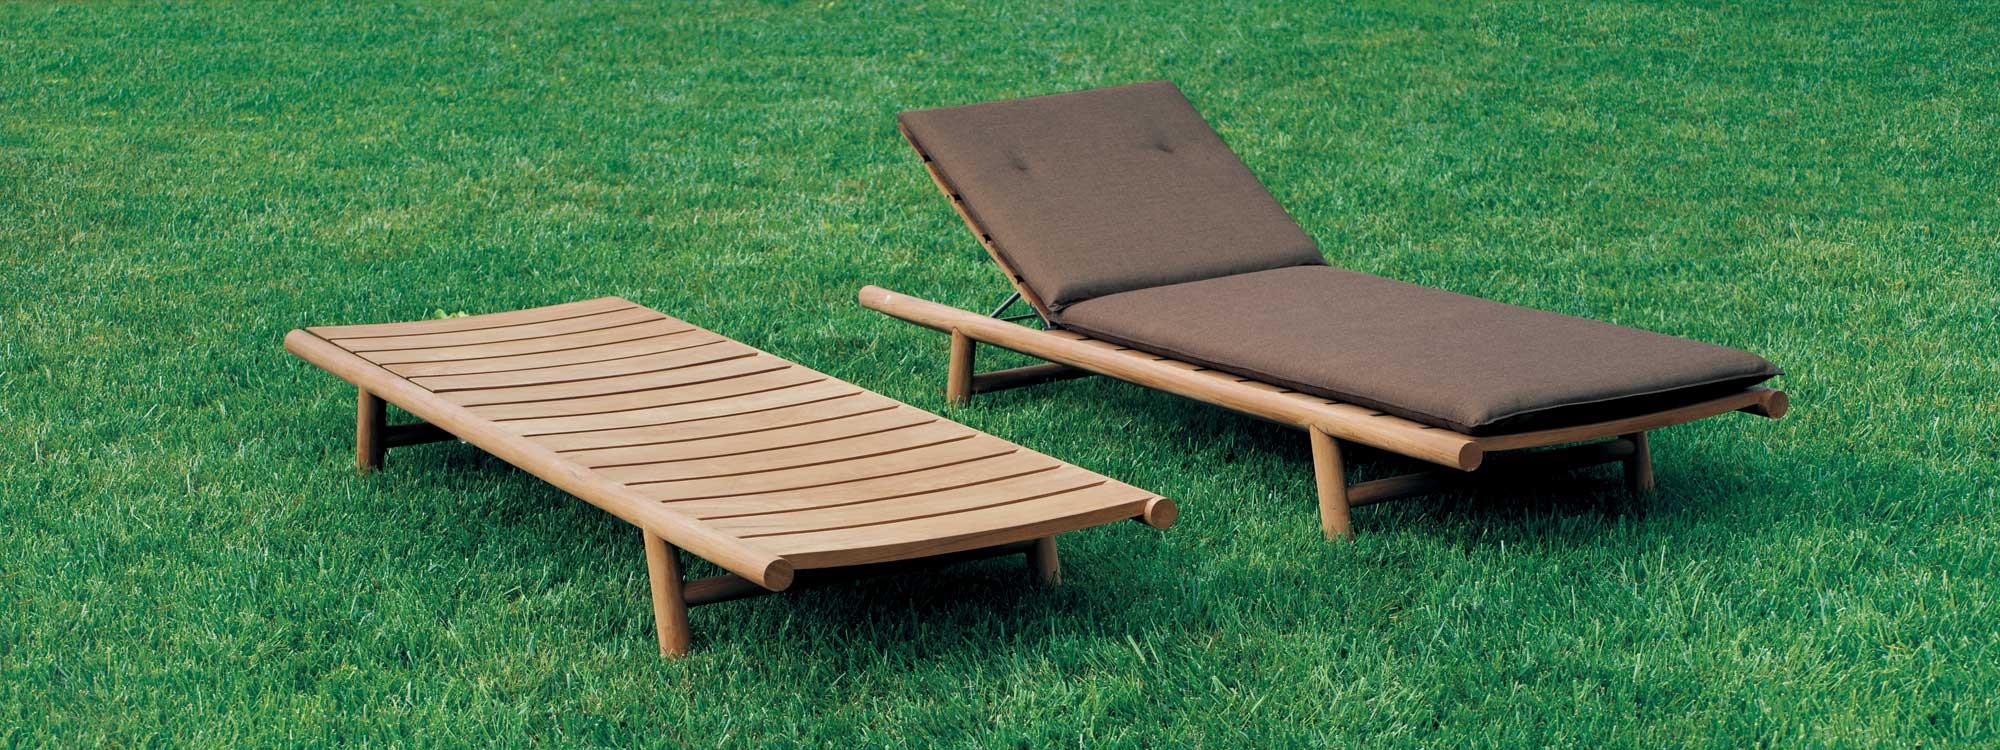 Orson teak sun beds with brown cushions on verdant lawn